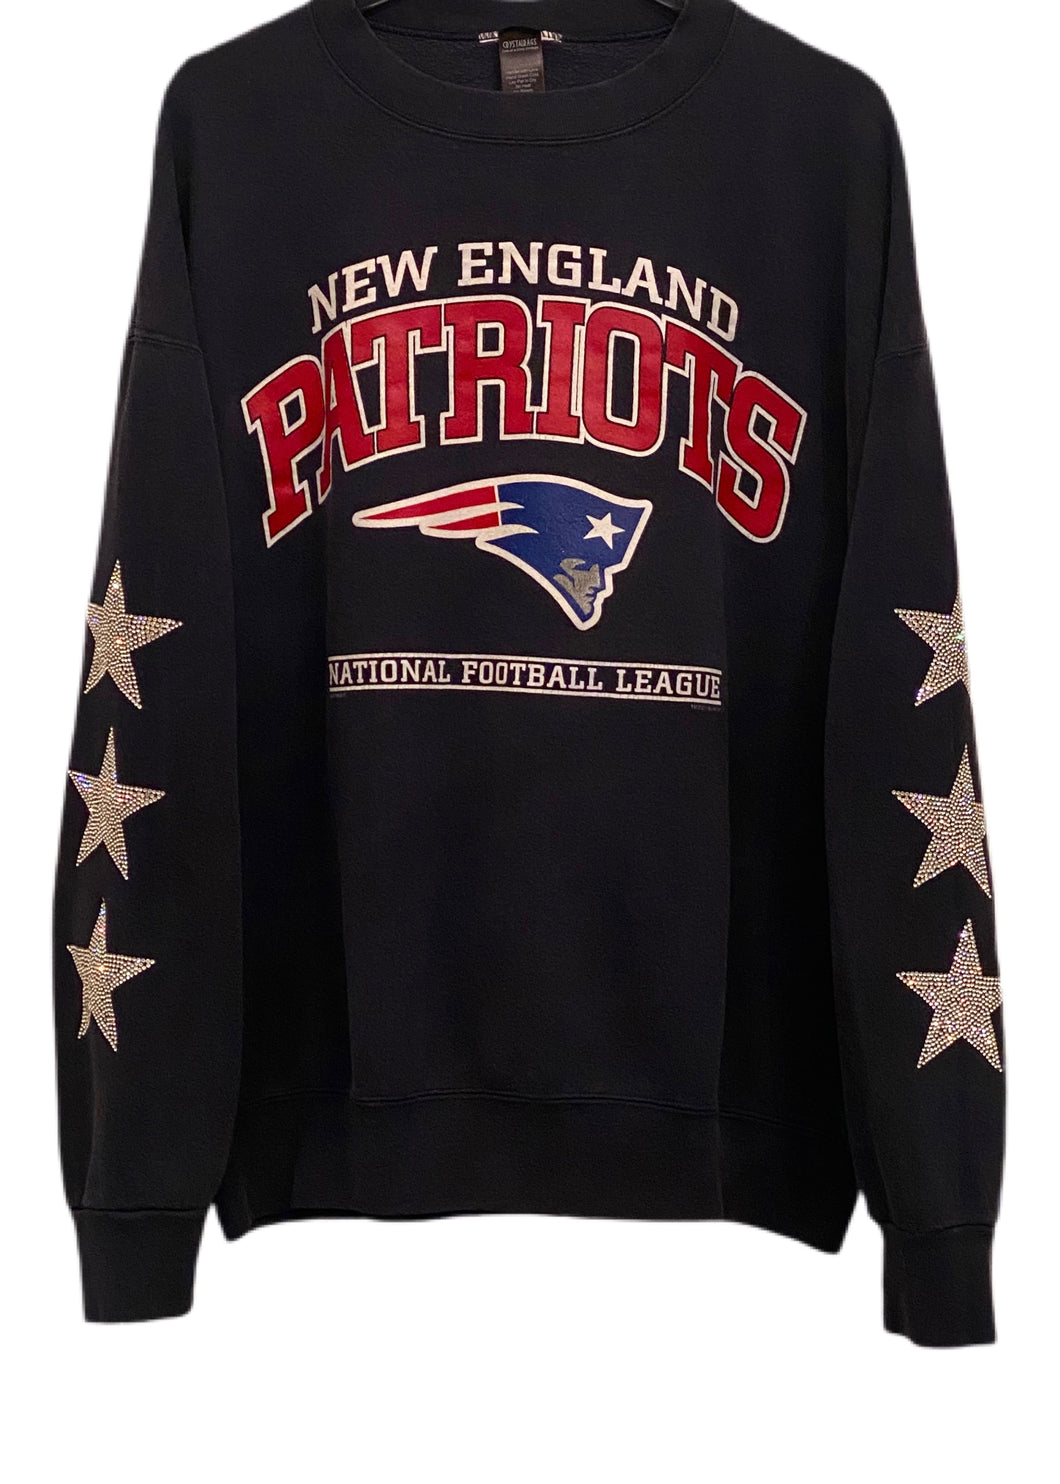 New England Patriots, NFL One of a KIND Vintage Sweatshirt with Three Crystal Star Design